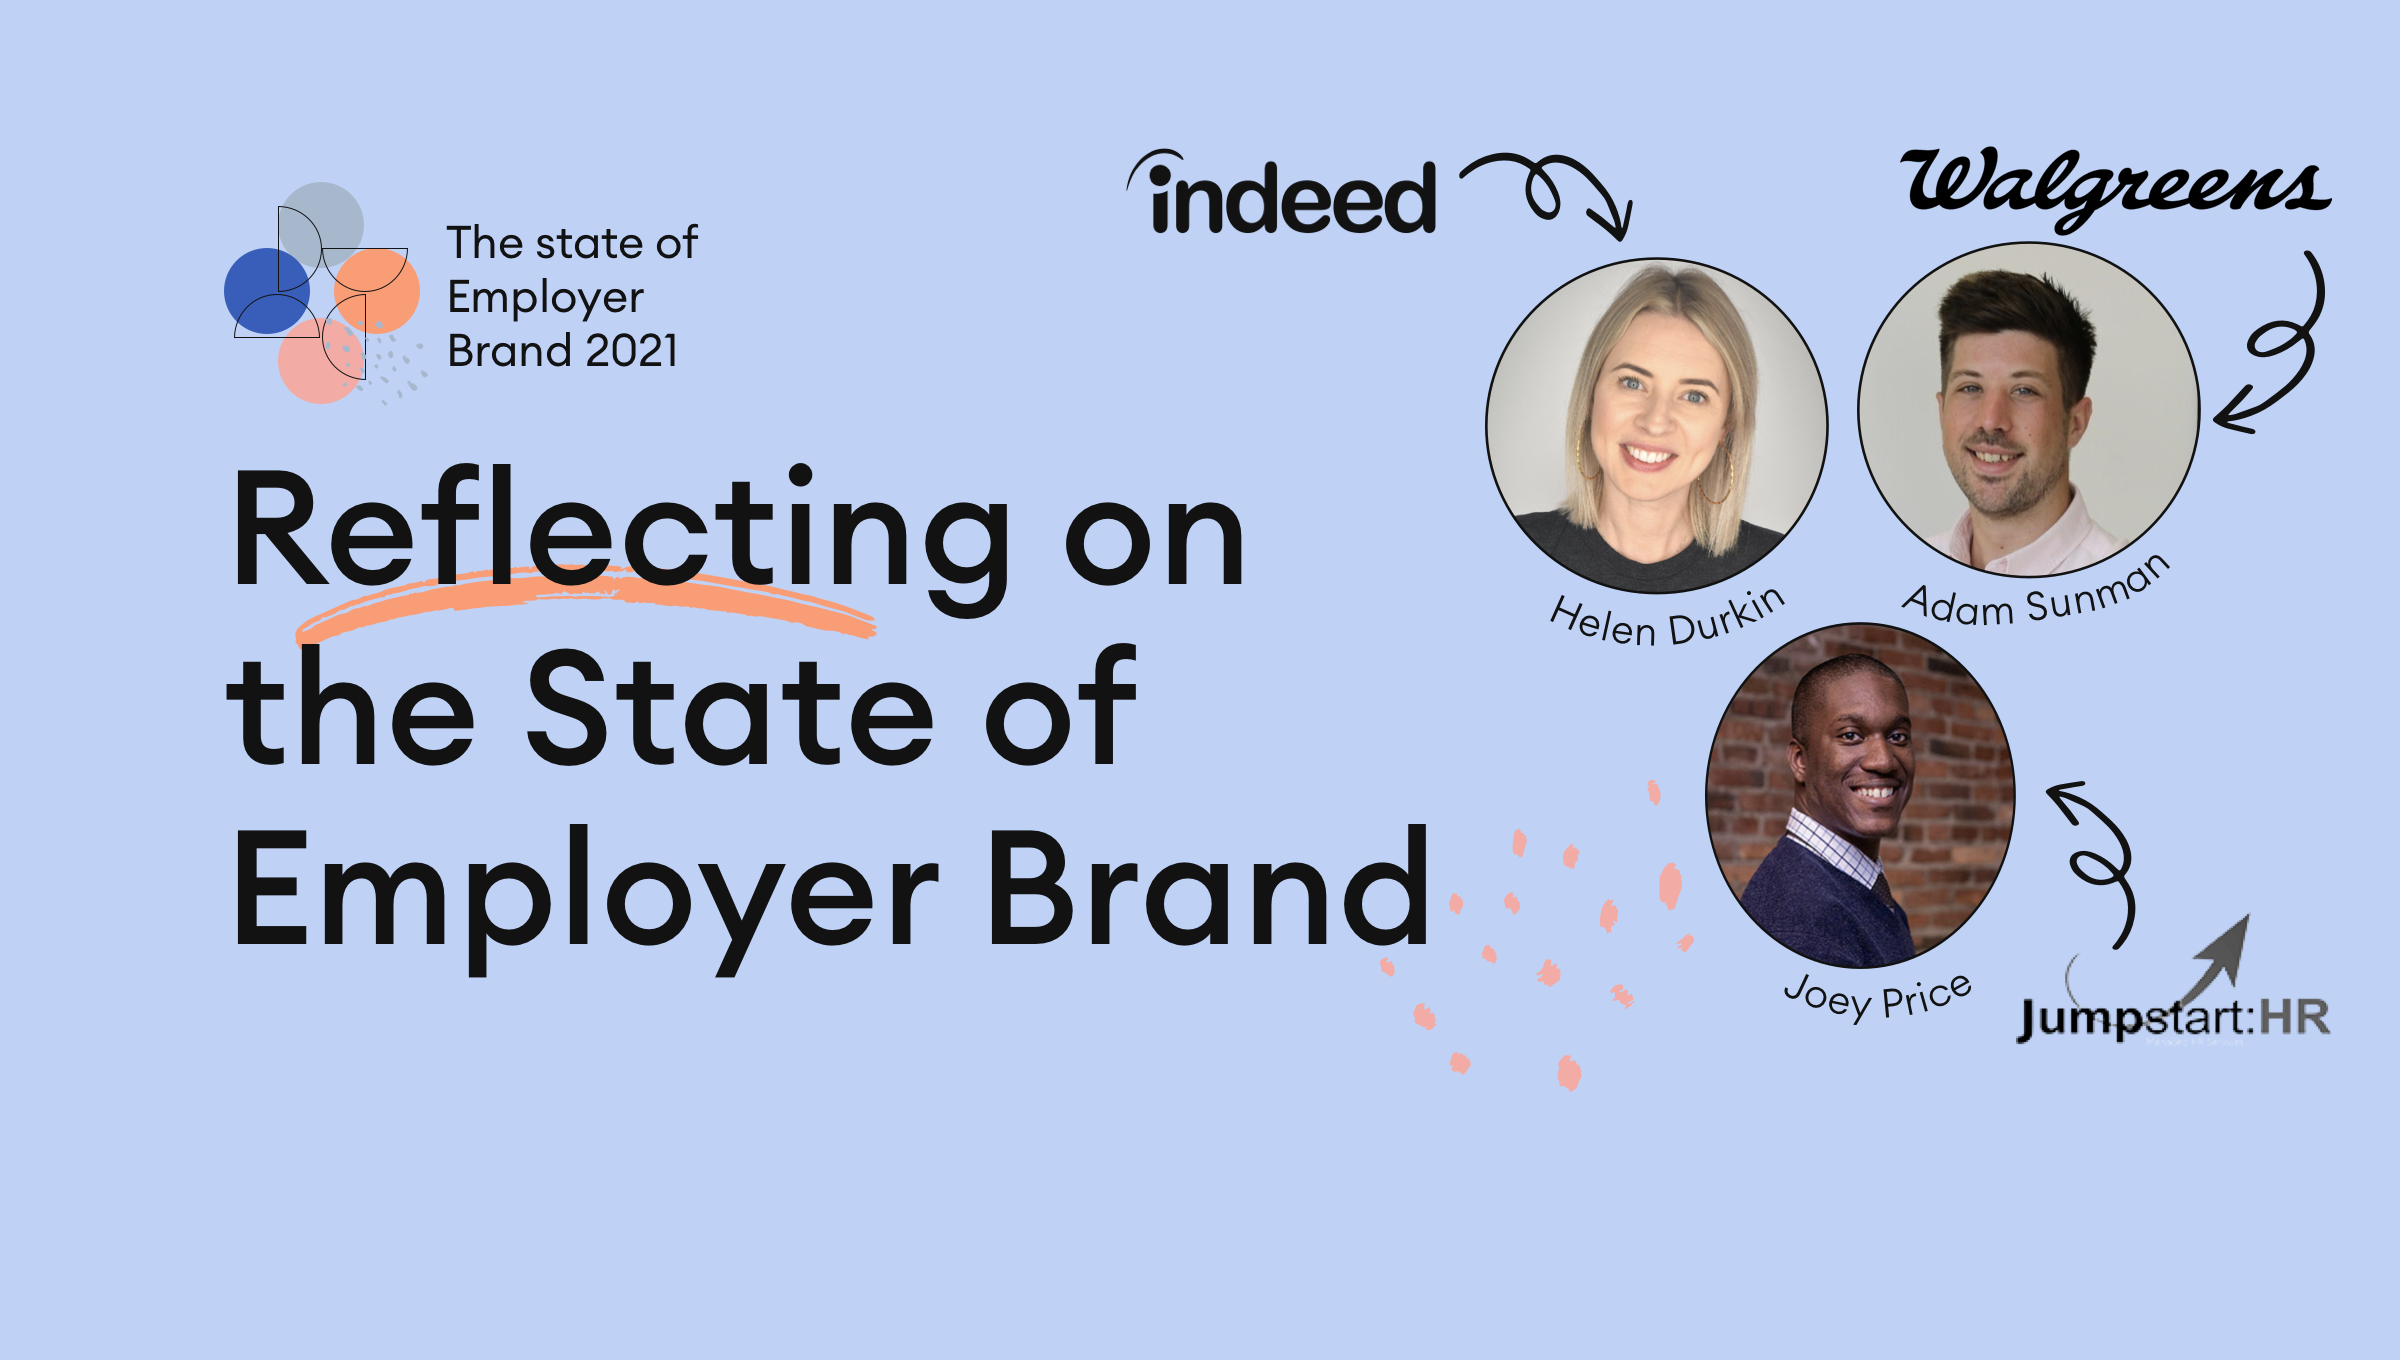 Reflecting on the State of Employer Brand with Indeed, Walgreens Boots Alliance and Jumpstart:HR. hero image